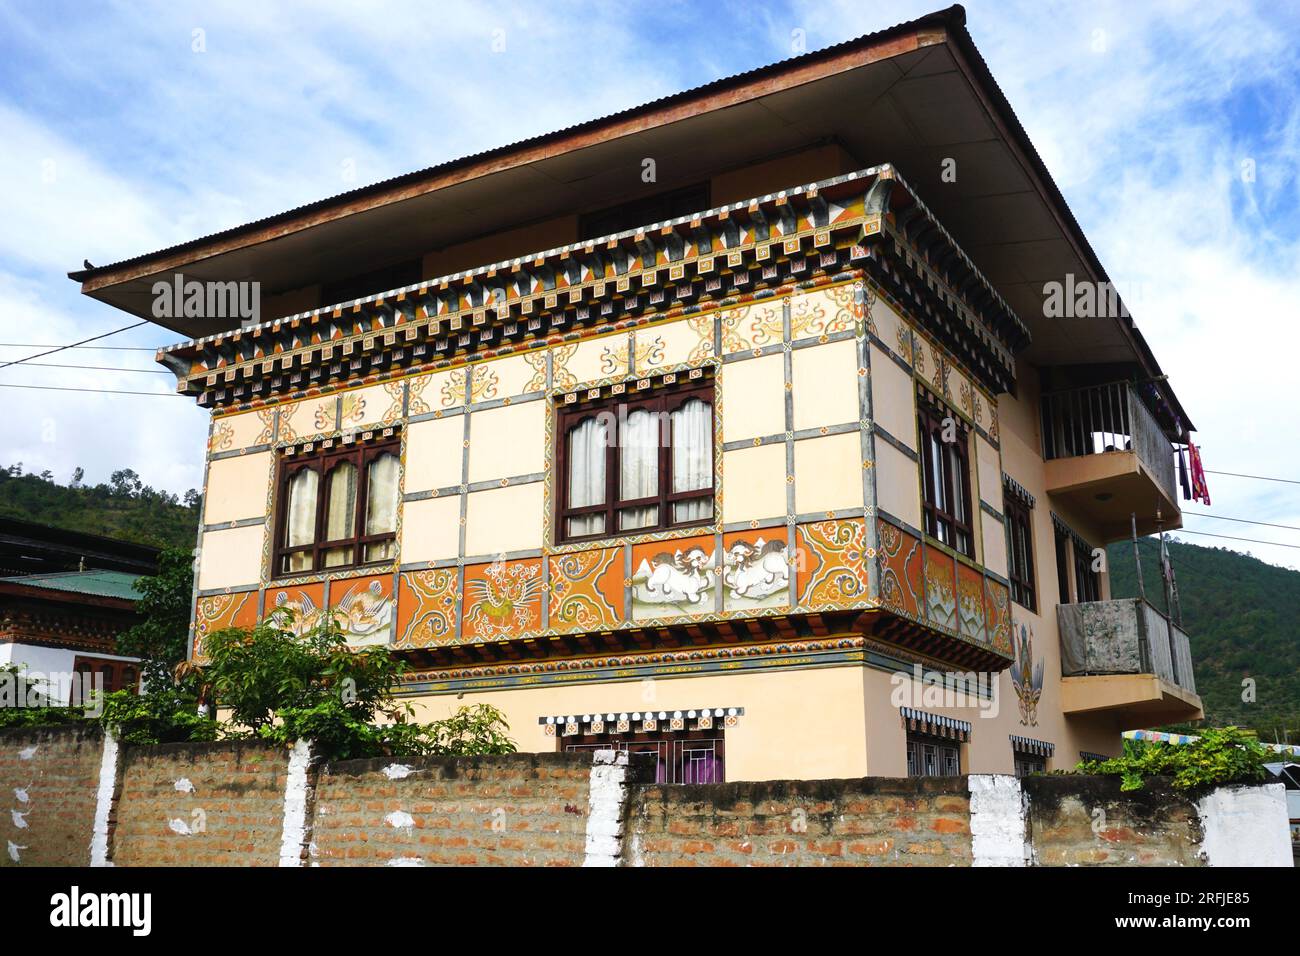 Typical Bhutanese architecture with square overhanging roof, timber framing, painted protruding rafters, triplet windows and decorative painted murals Stock Photo